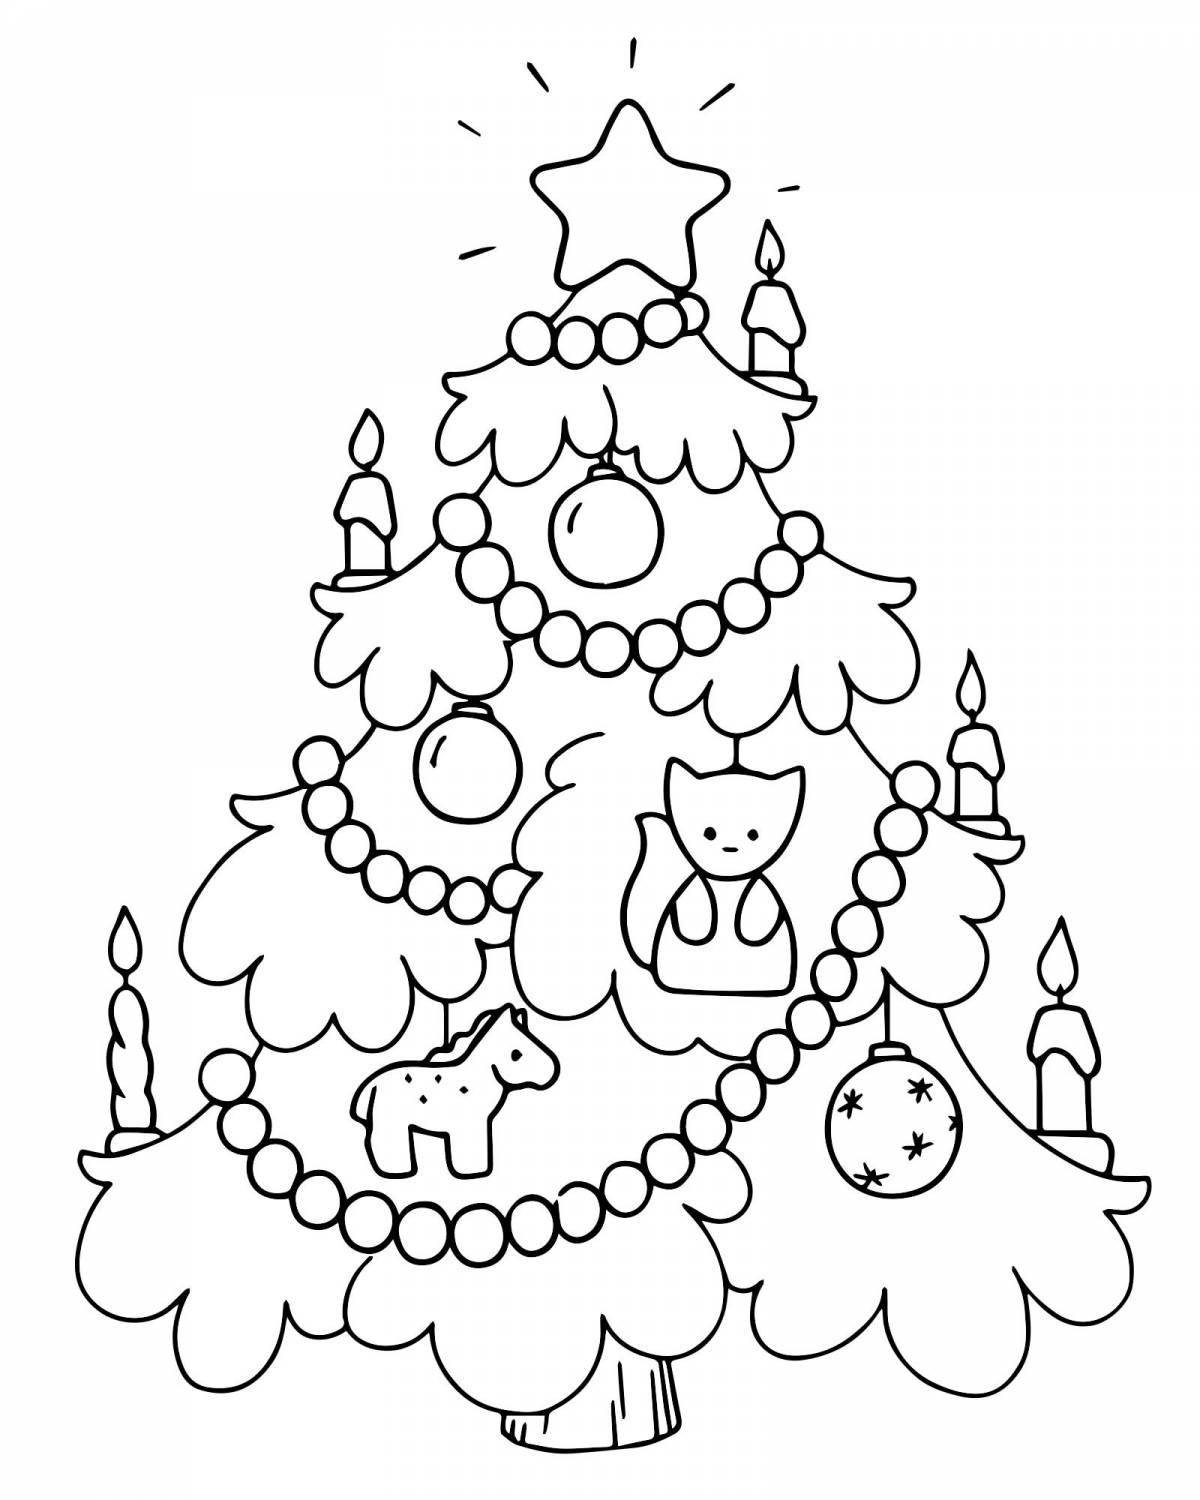 Grand Christmas tree with toys